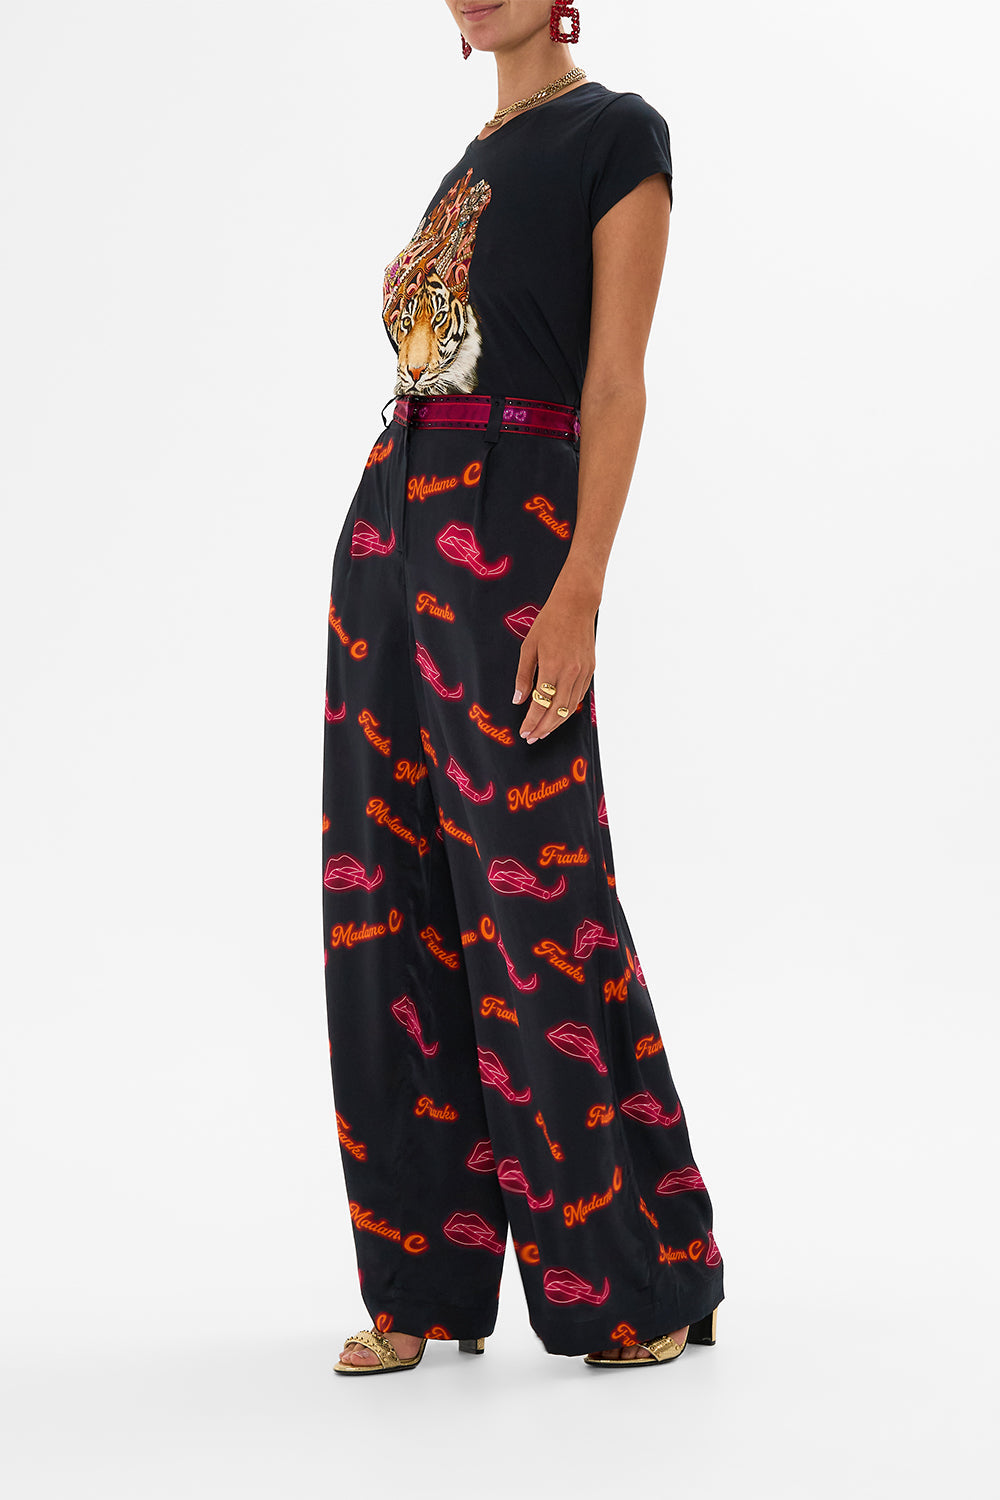 CAMILLA black wide leg waisted pant in Electric Loveland print